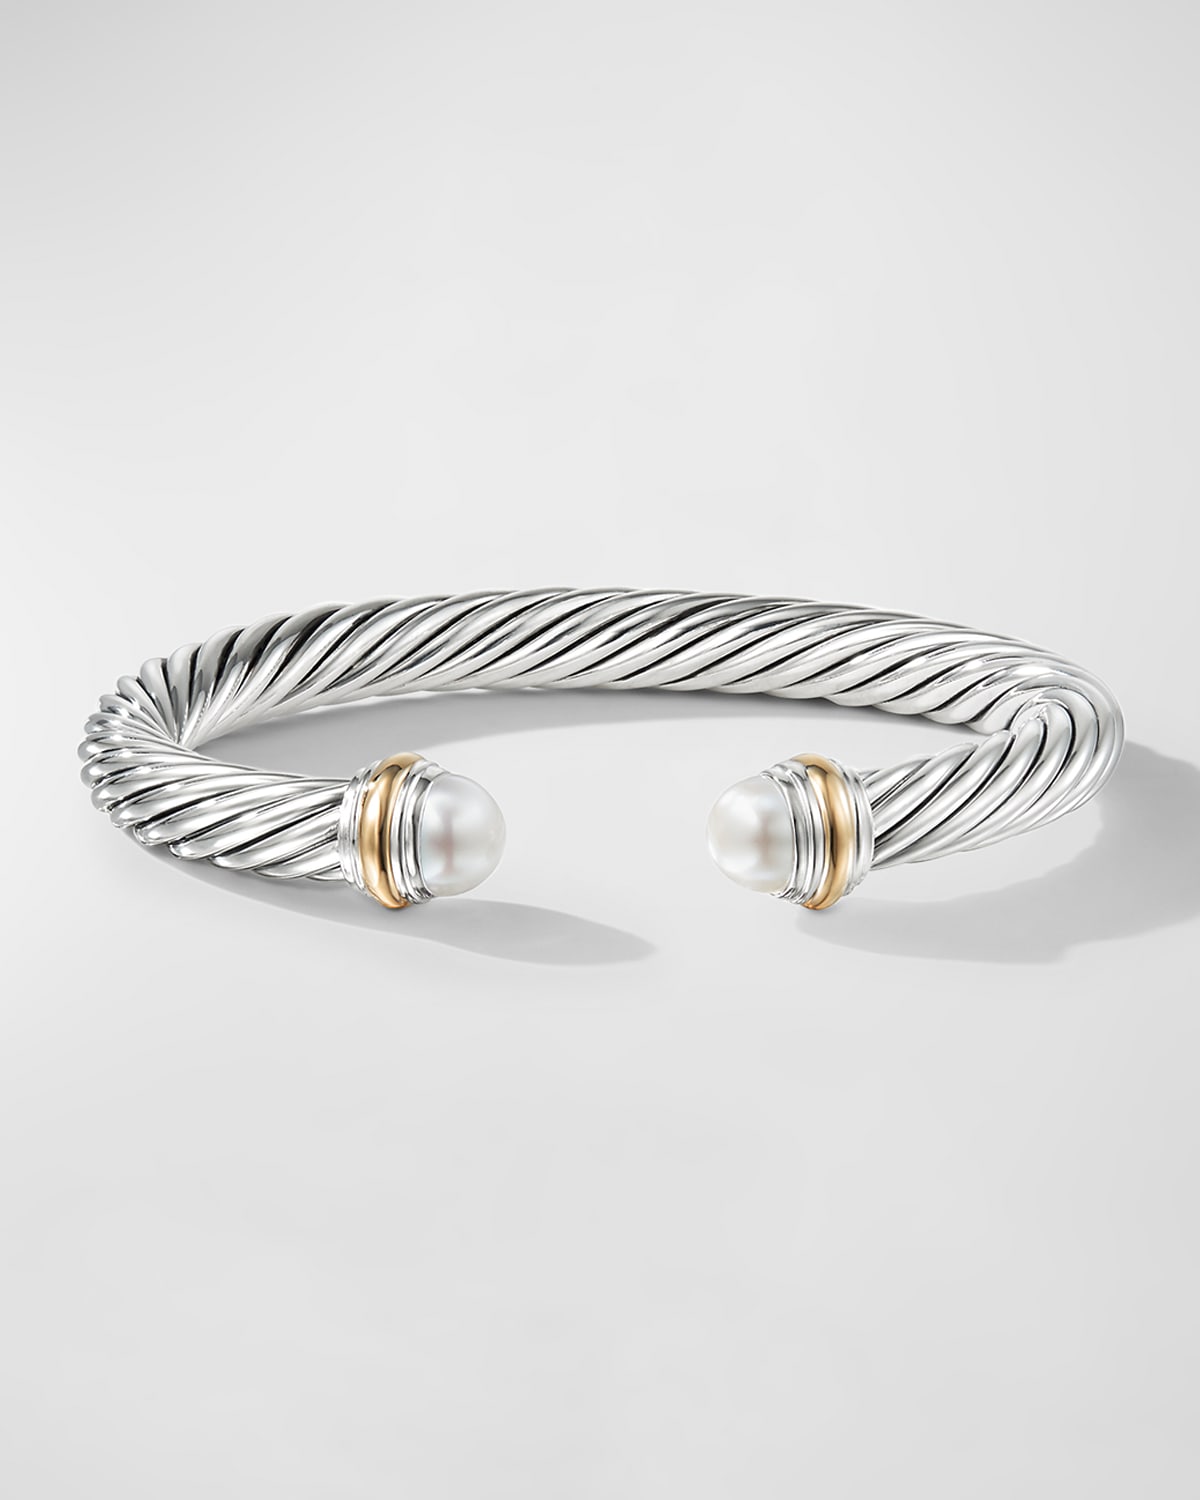 DAVID YURMAN CABLE BRACELET WITH GEMSTONE AND 14K GOLD IN SILVER, 7MM,PROD220860449